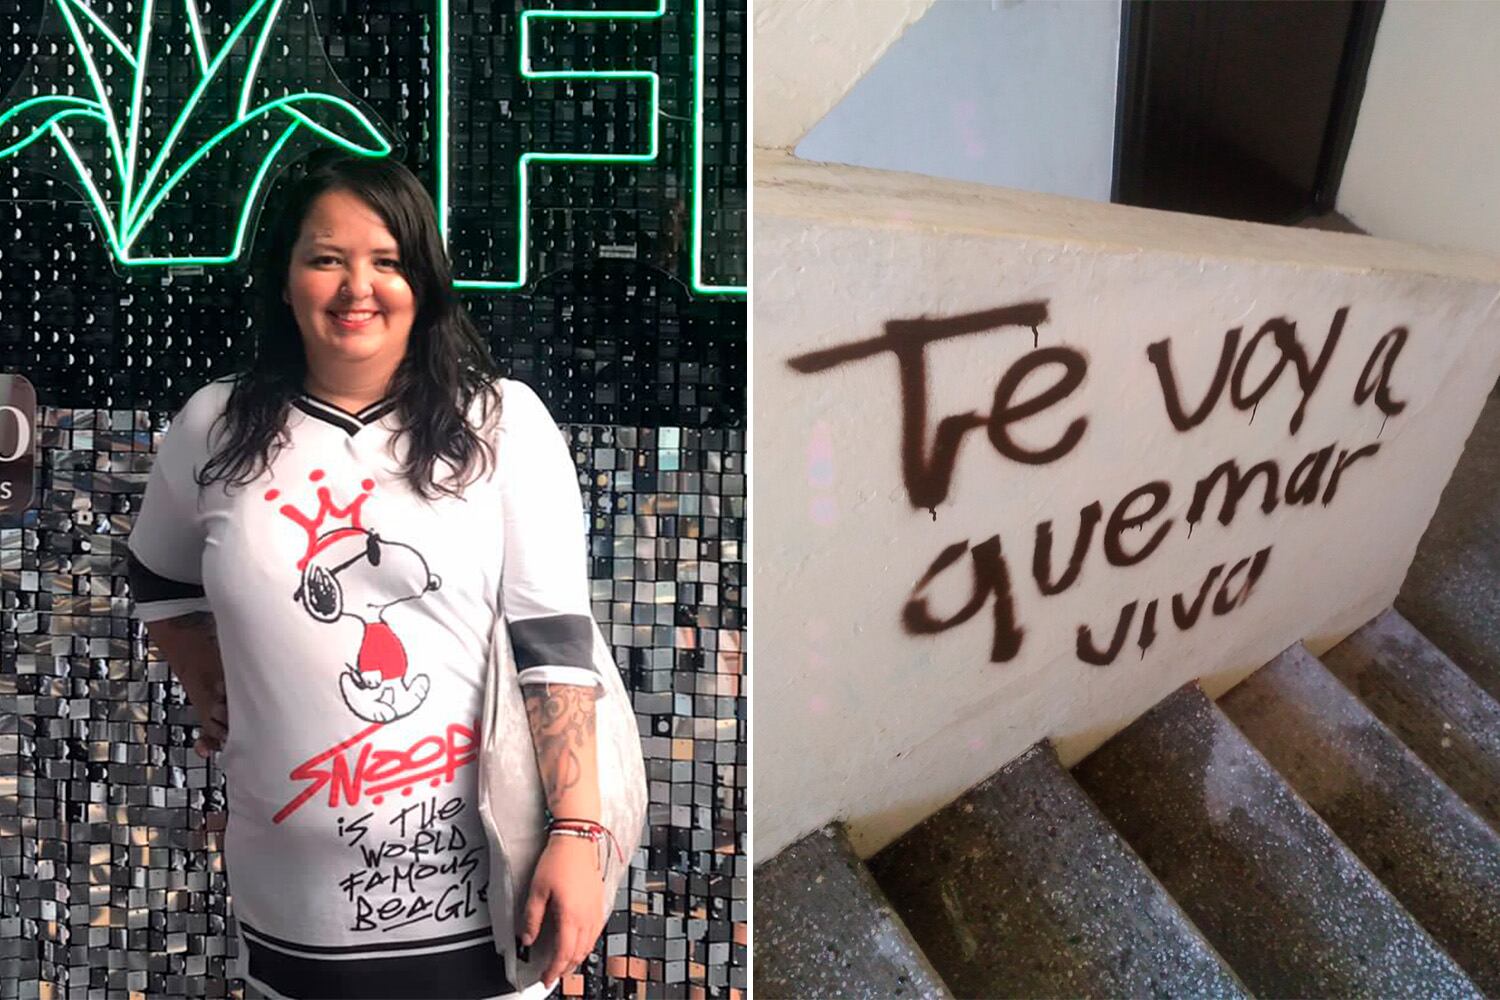 Luz Raquel Padilla in an image posted on her social media. Right: graffiti warning 'I am going to burn you alive'